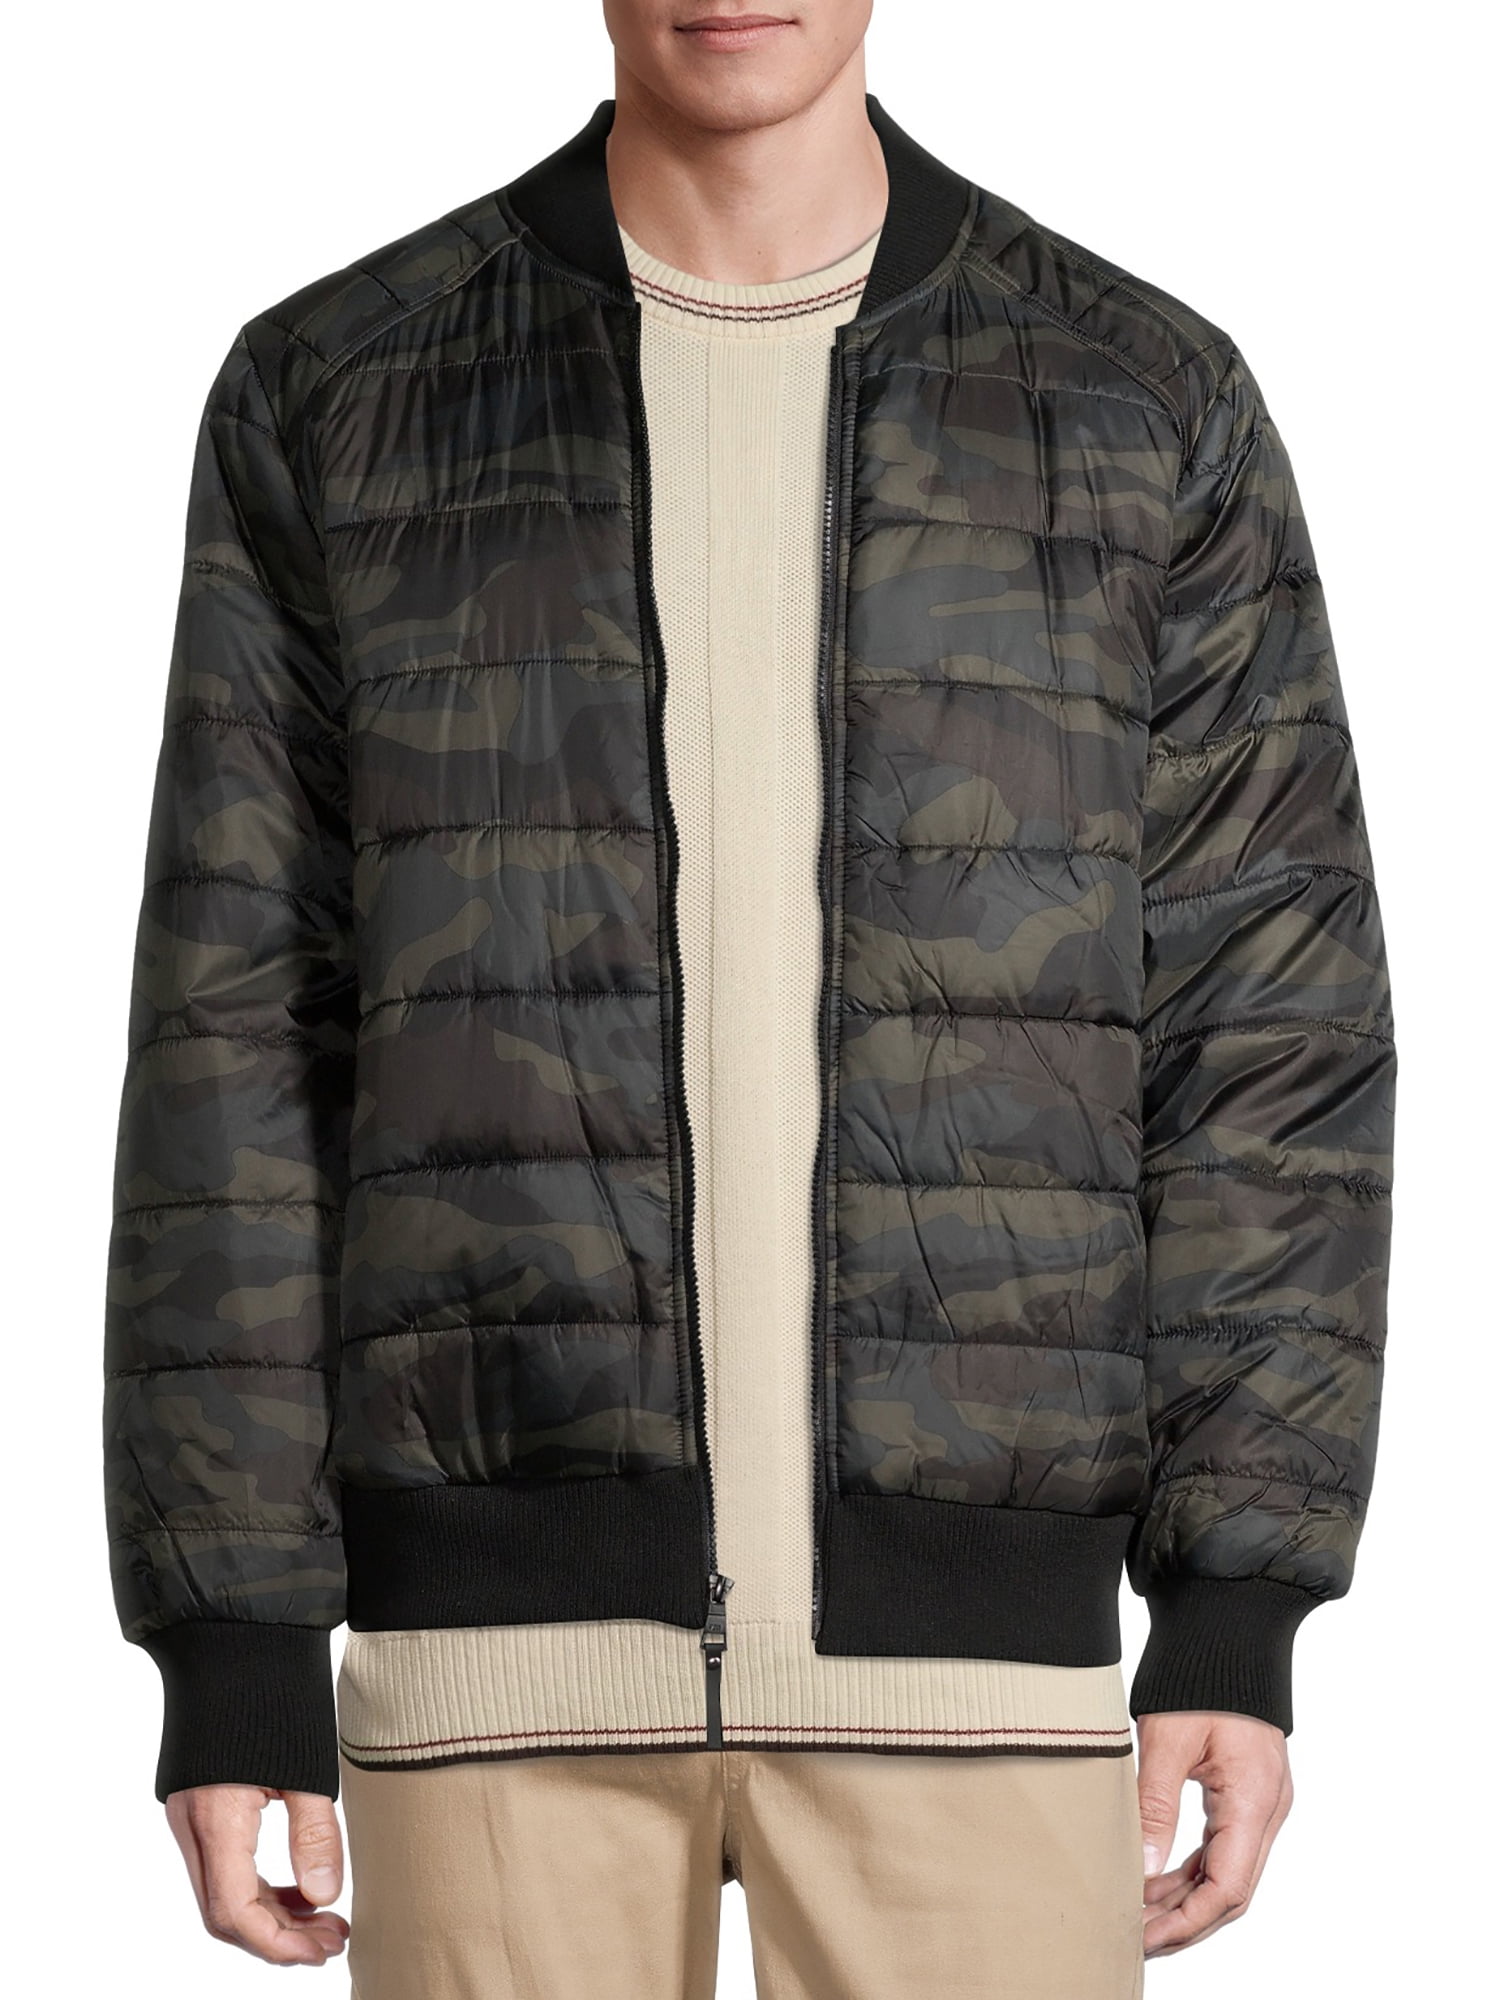 URBAN REPUBLIC boys Boys Microfiber Quilted Thinfill Jacket 